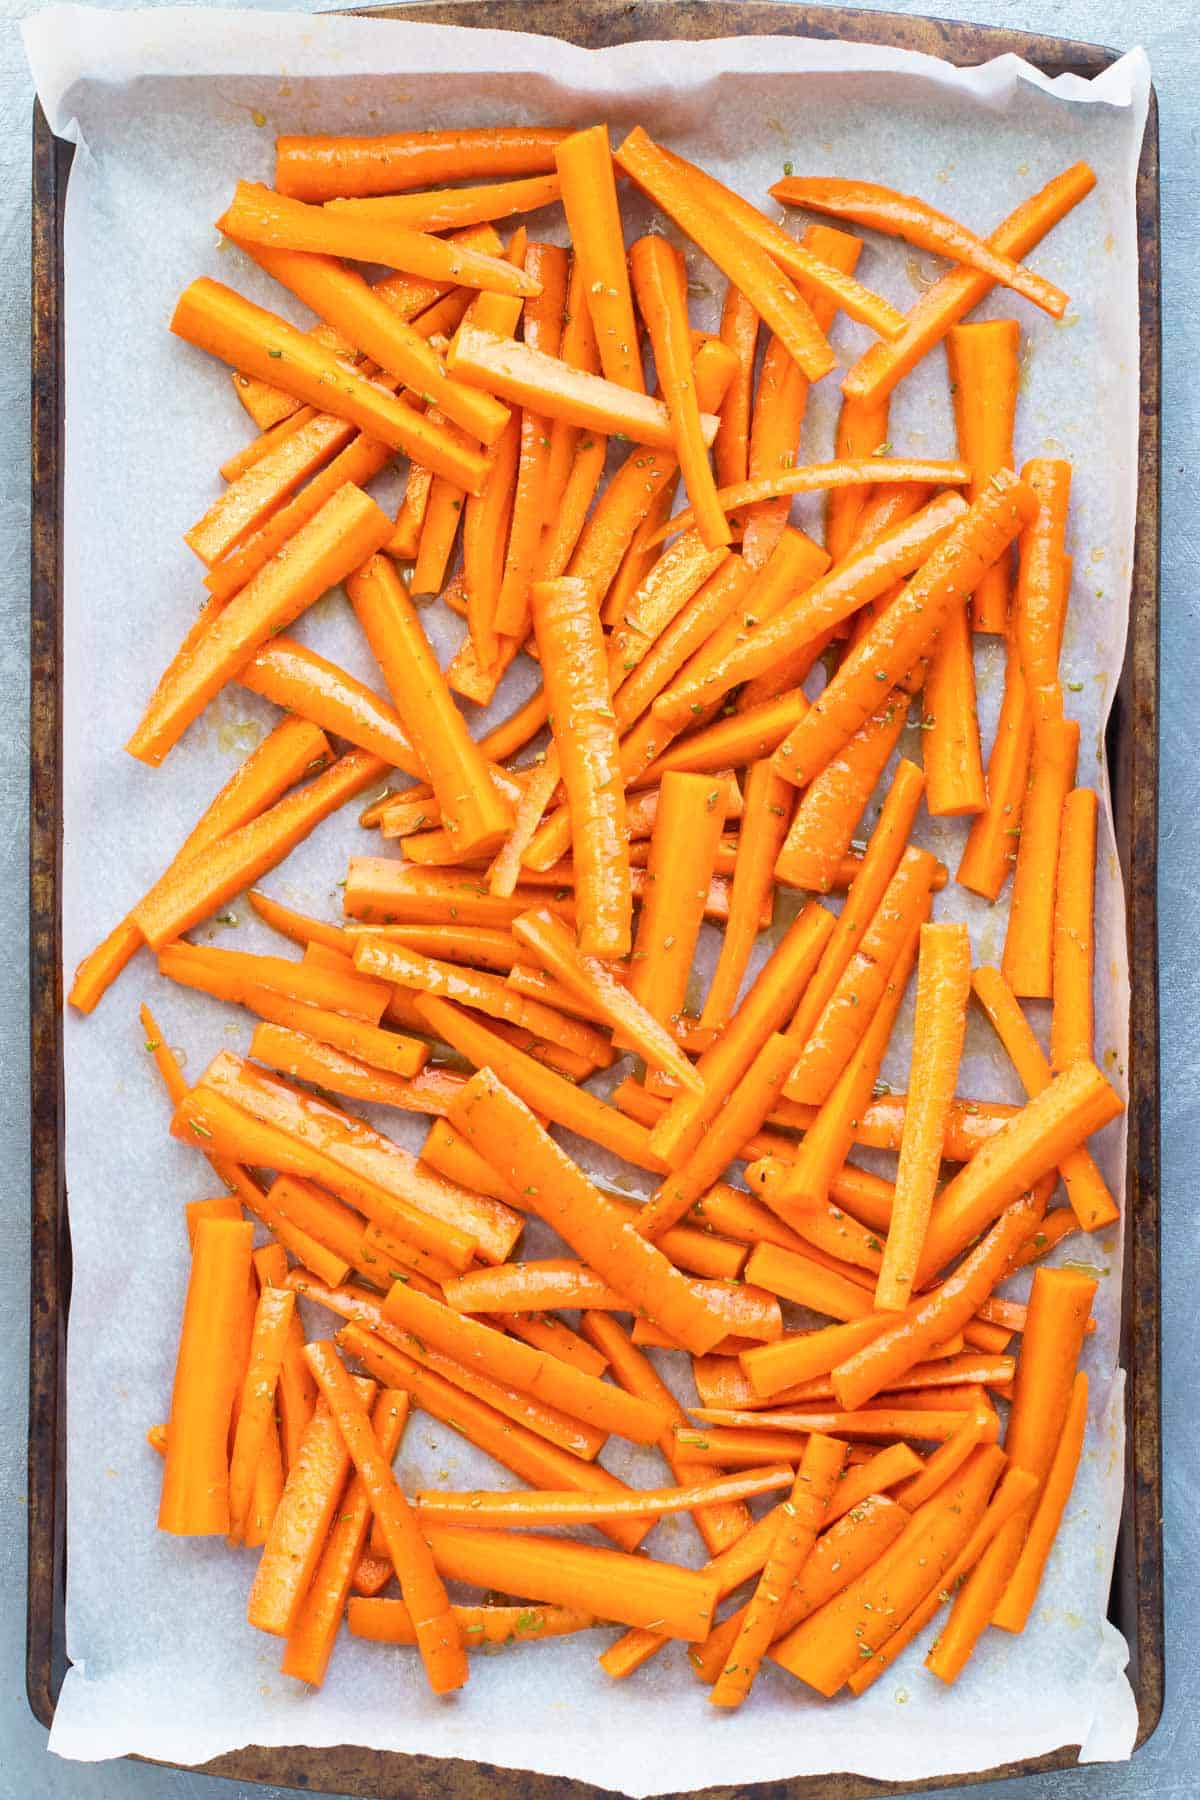 Honey roasted carrots on a baking sheet lined with parchment paper.